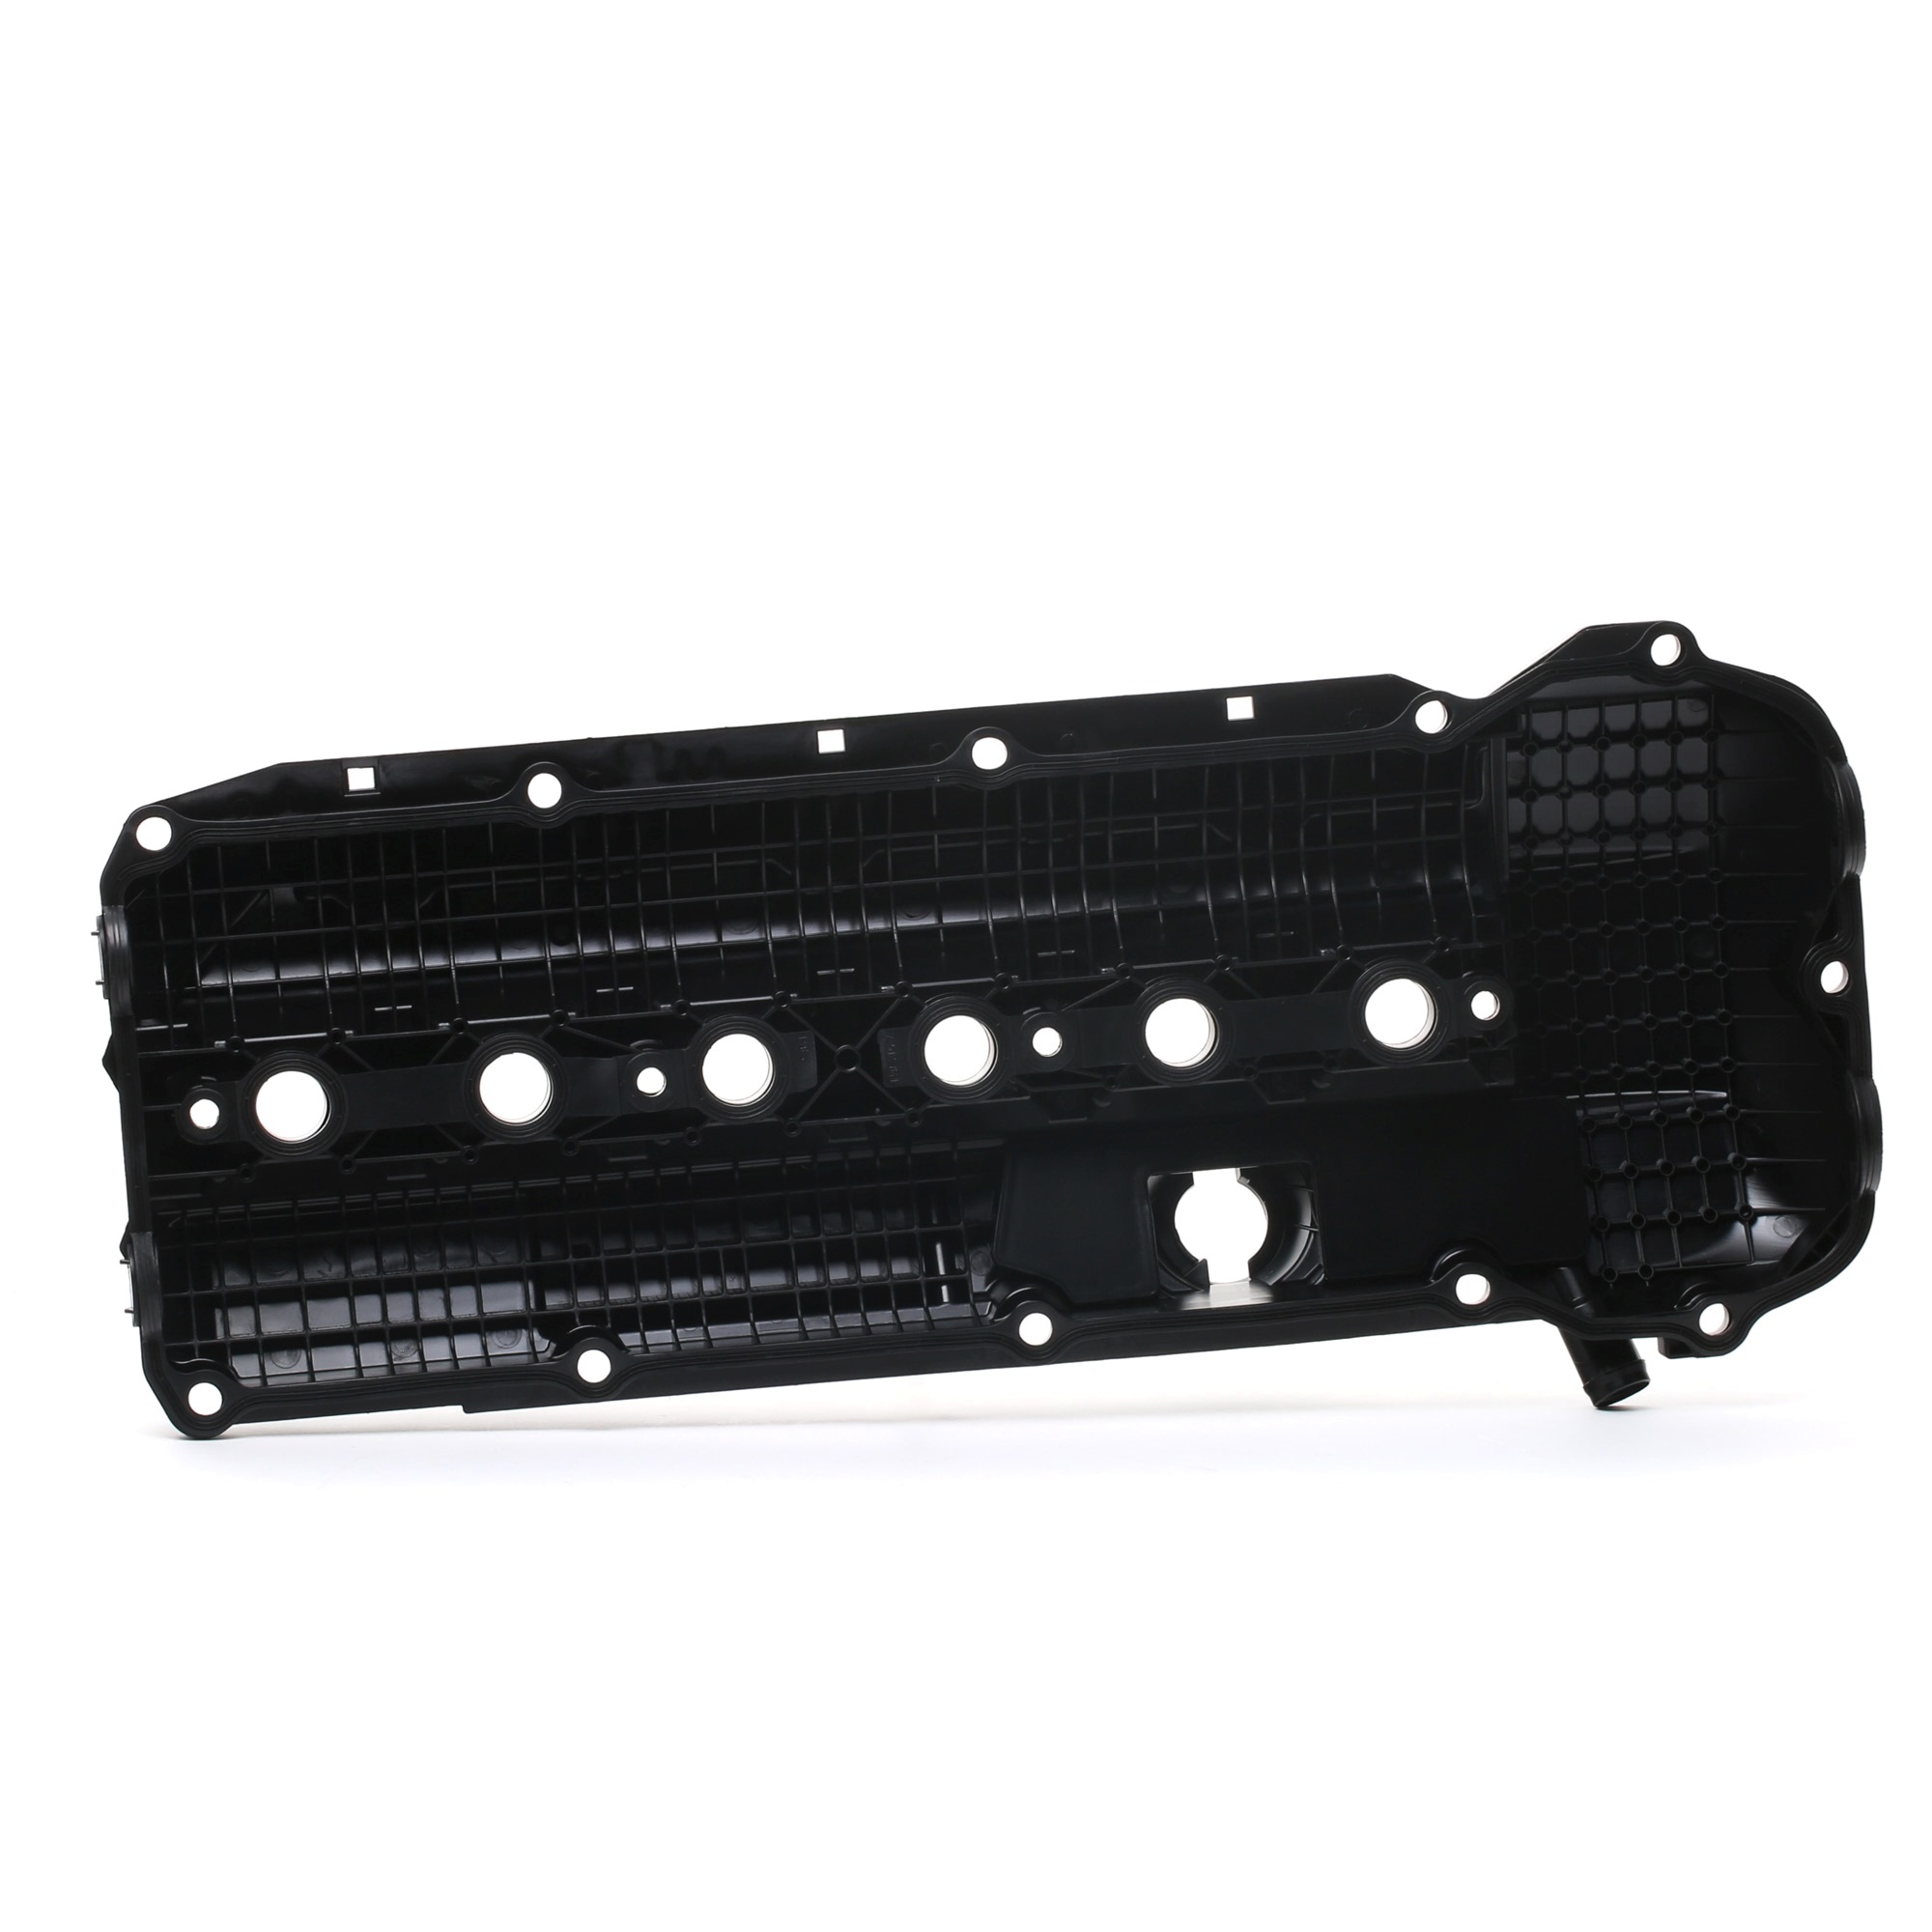 Valve cover STARK with valve cover gasket, without bolts/screws - SKCHC-4860003